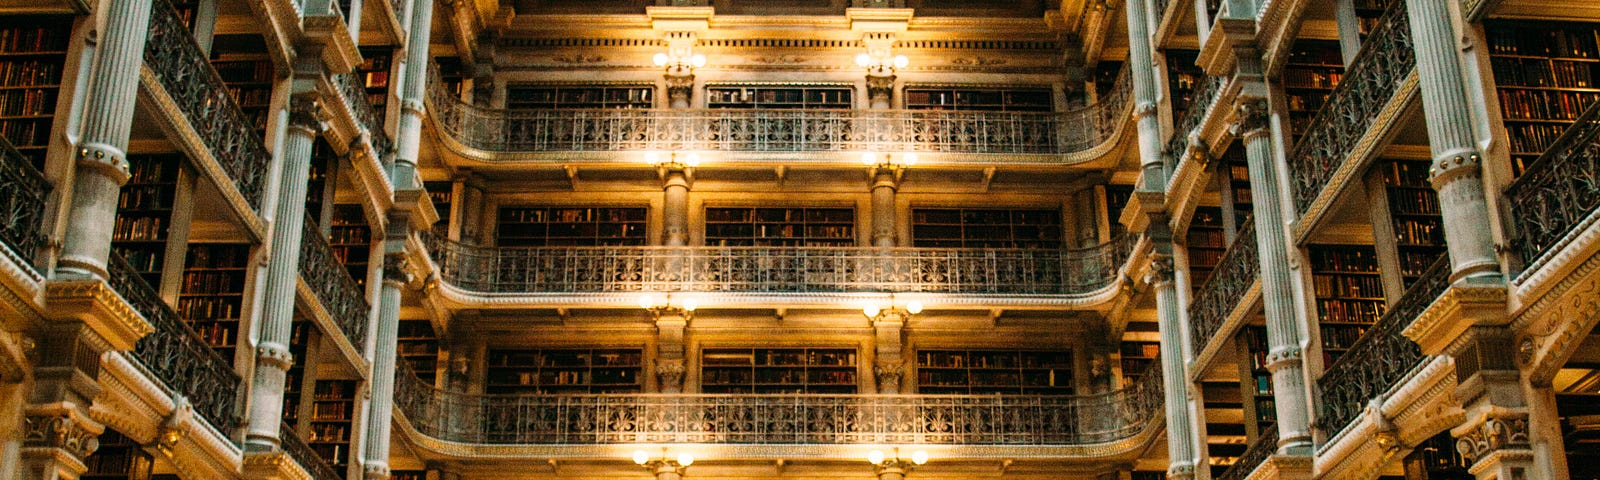 Man reading at George Peabody library Baltimore.